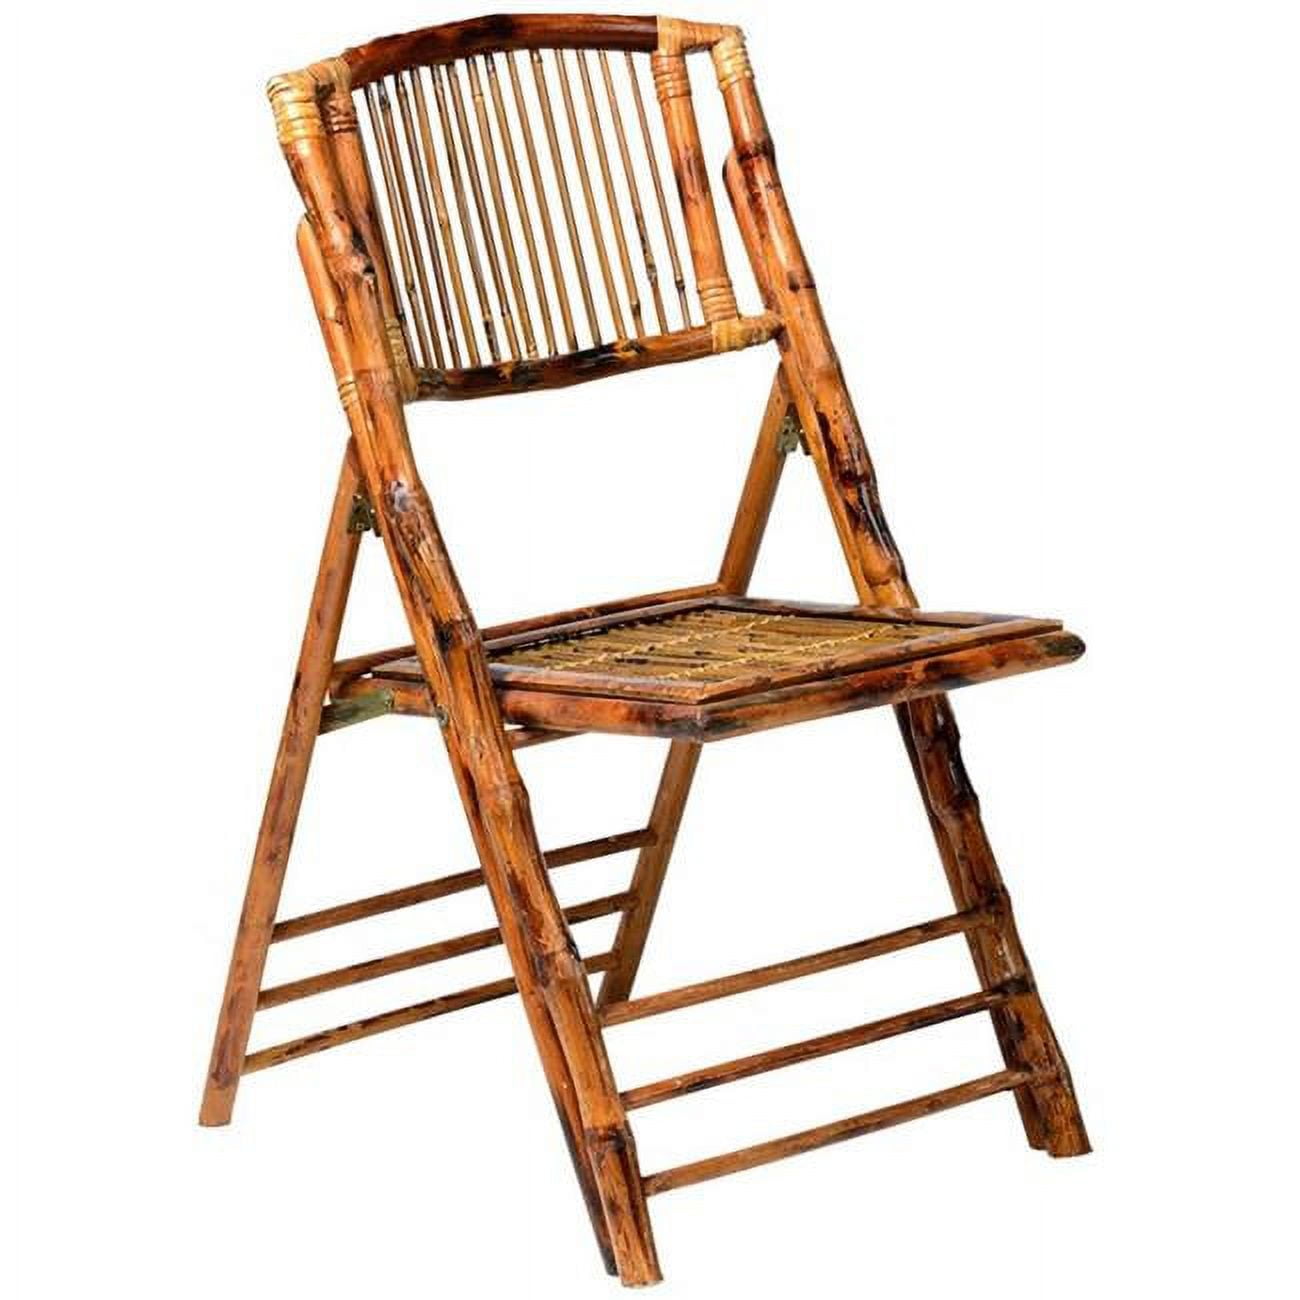 Picture of Commerical Seating Products BO-100-SB-WEB1 American Classic Bamboo Folding Chair - 34 x 18.25 x 21.5 in.